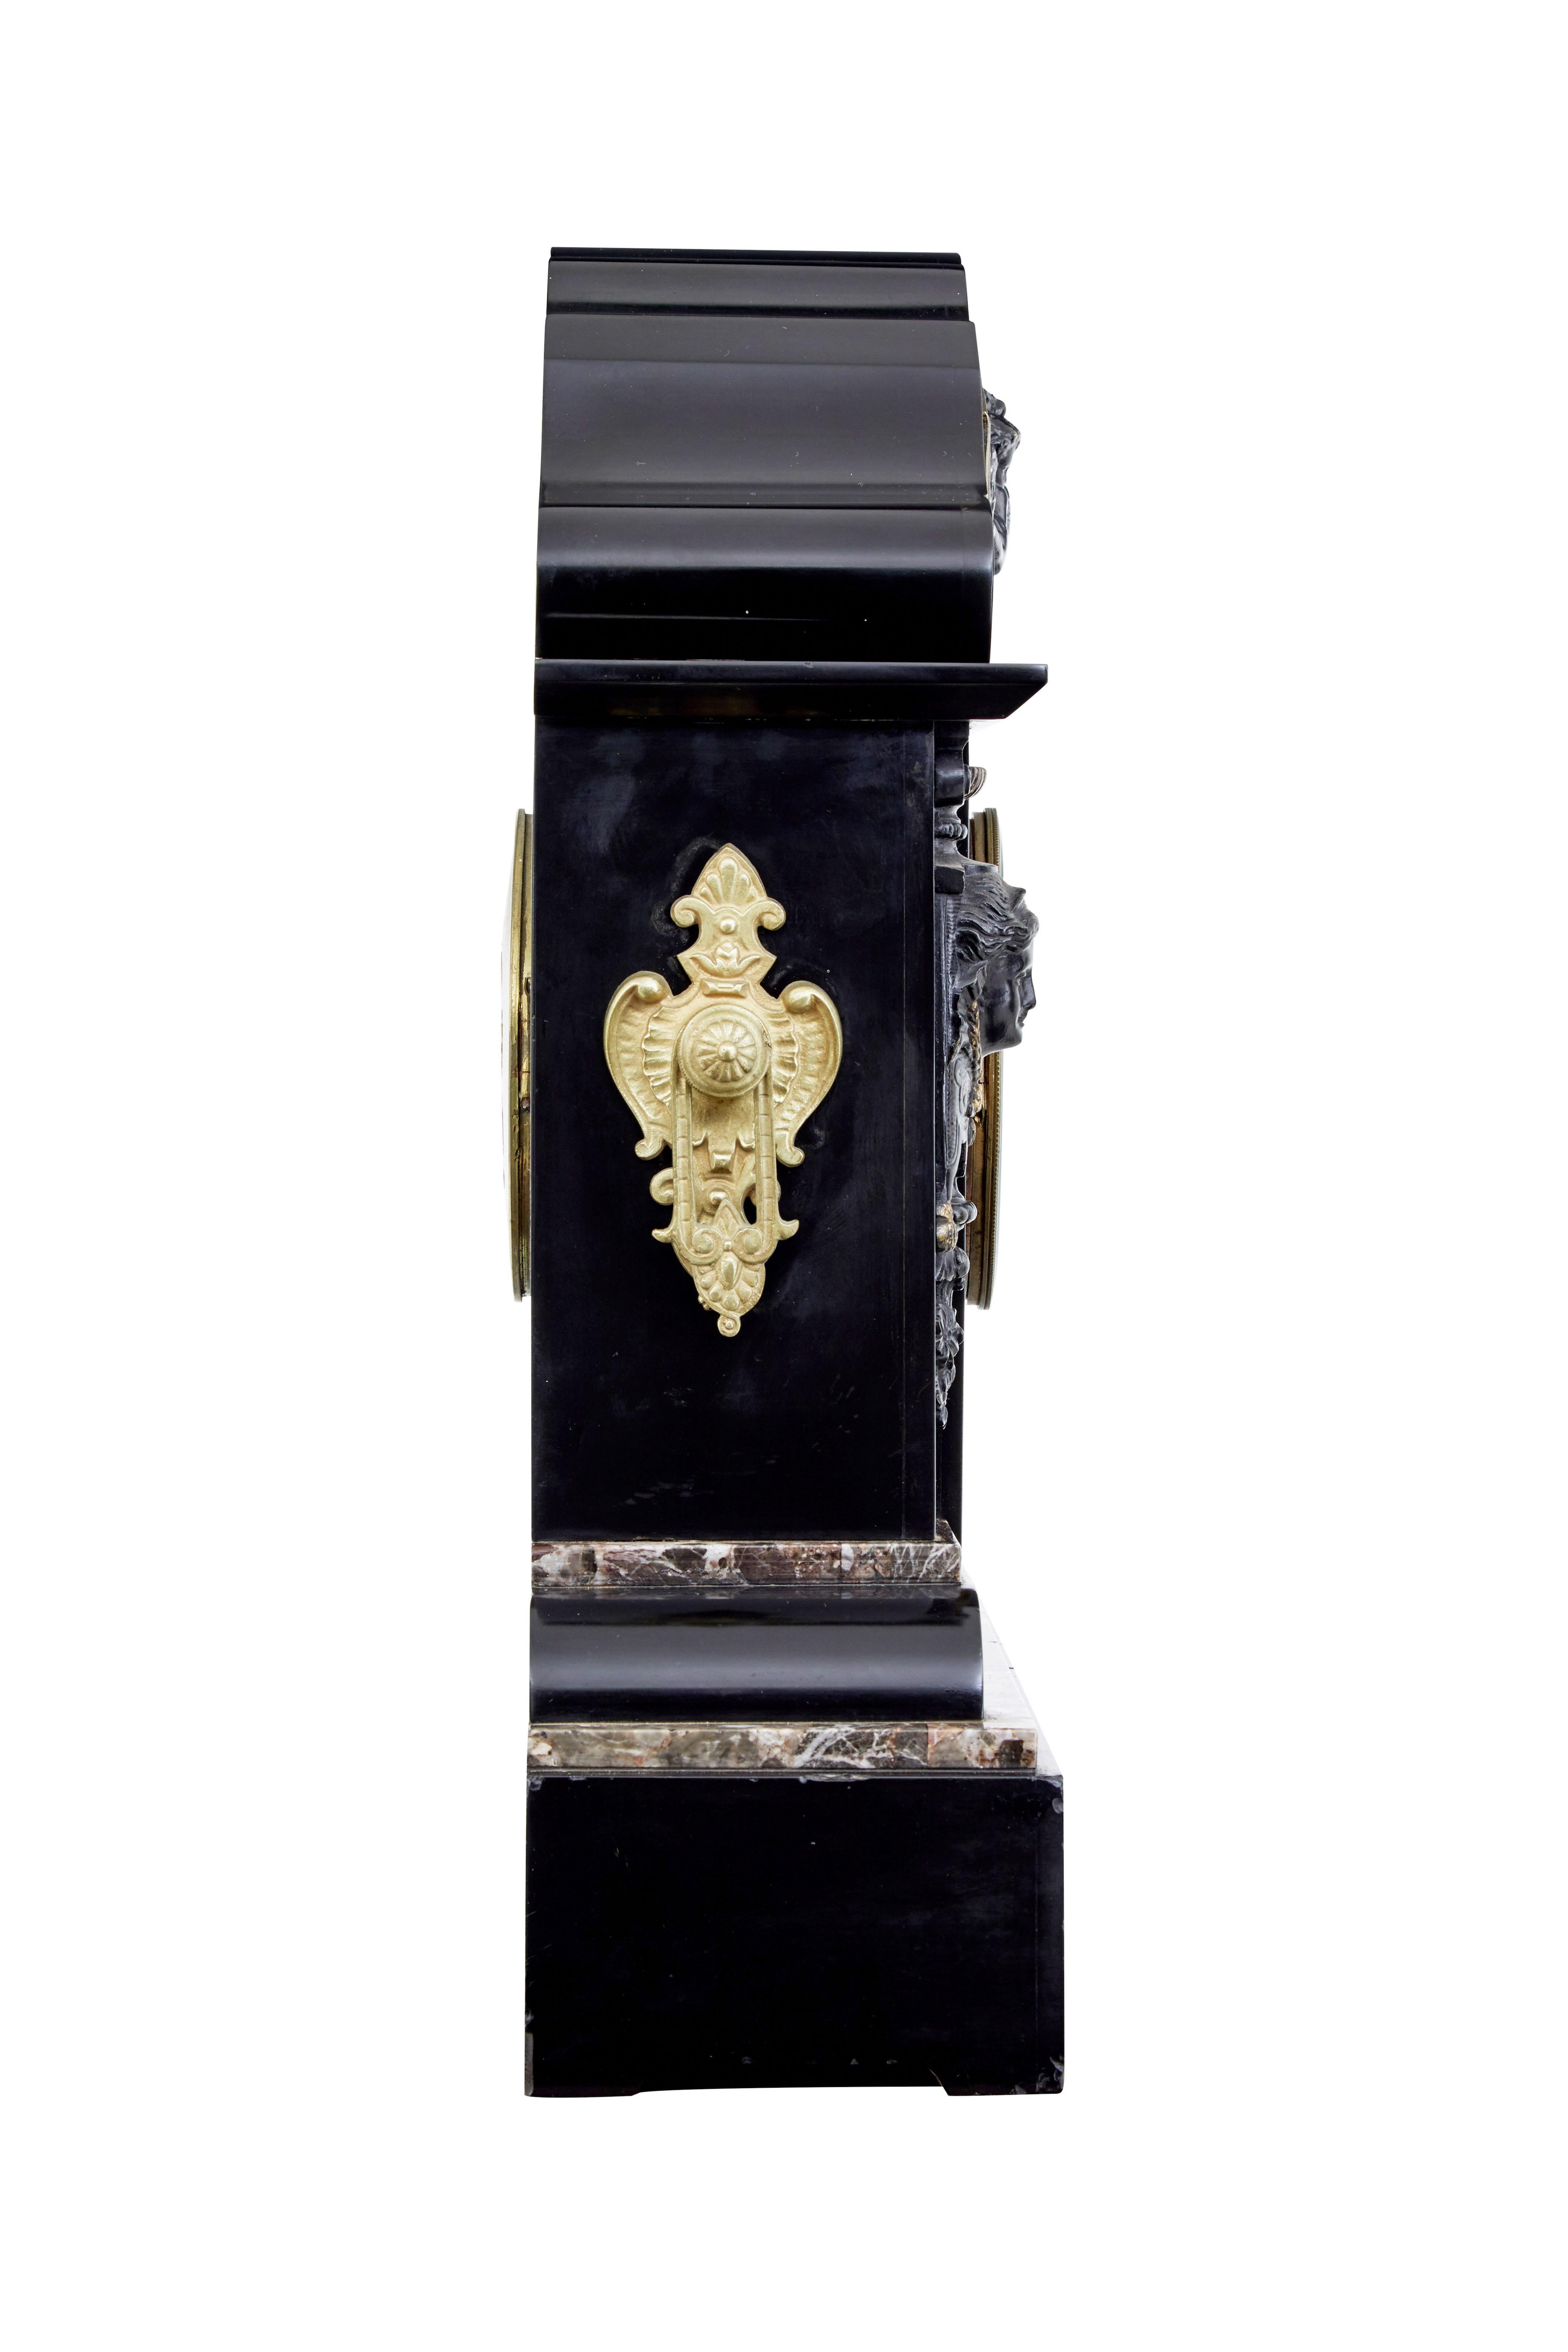 High victorian inlaid black marble mantel clock circa 1870.

Fine quality mantel clock of large proportions from the period in victorias reign when it was in vogue to commemorate the death of price albert.  Shaped architectural top with carved